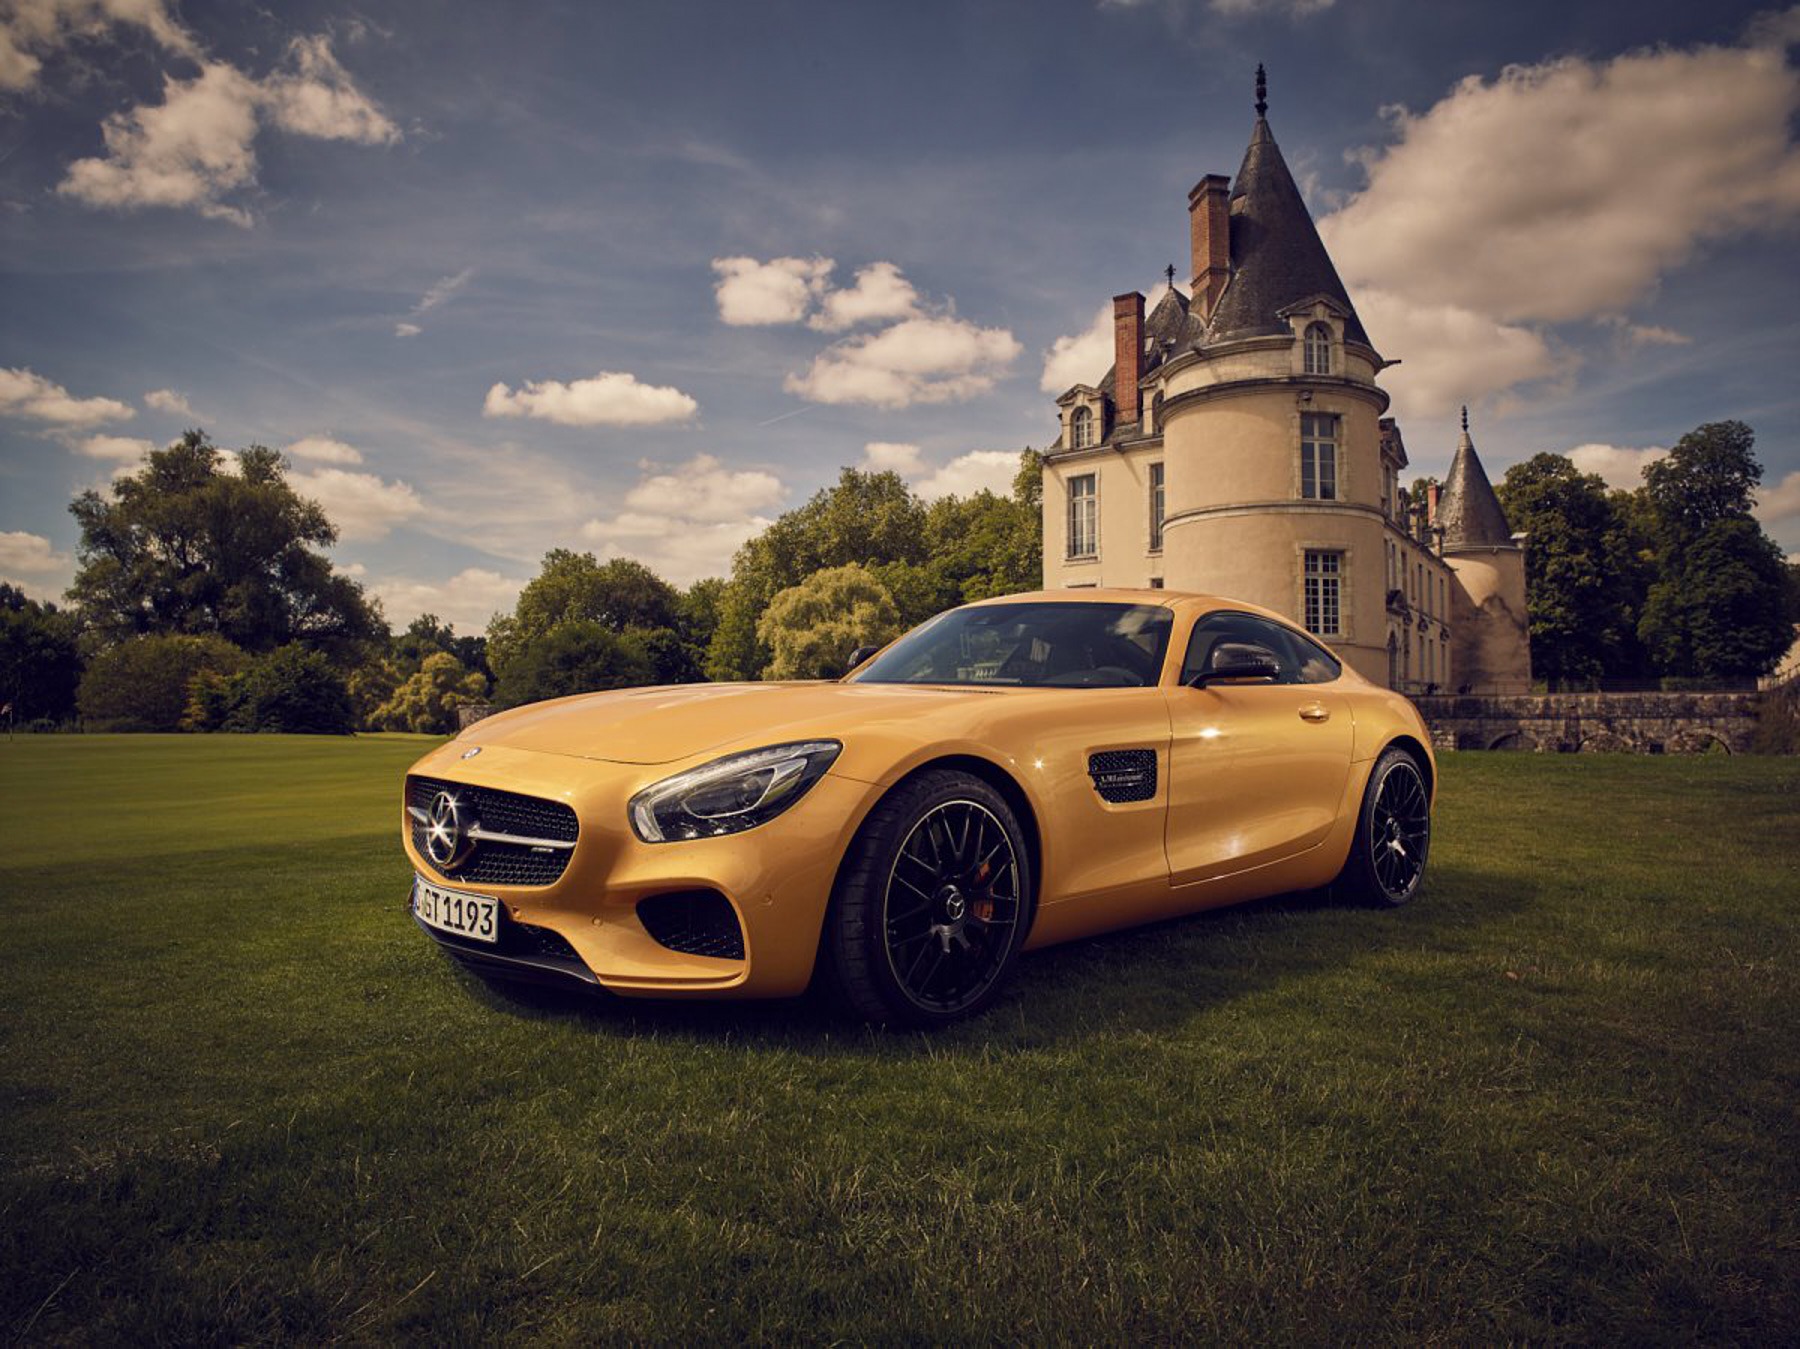 mercedes-benz advertorial paris (5 images) by Mike Meyer Photography